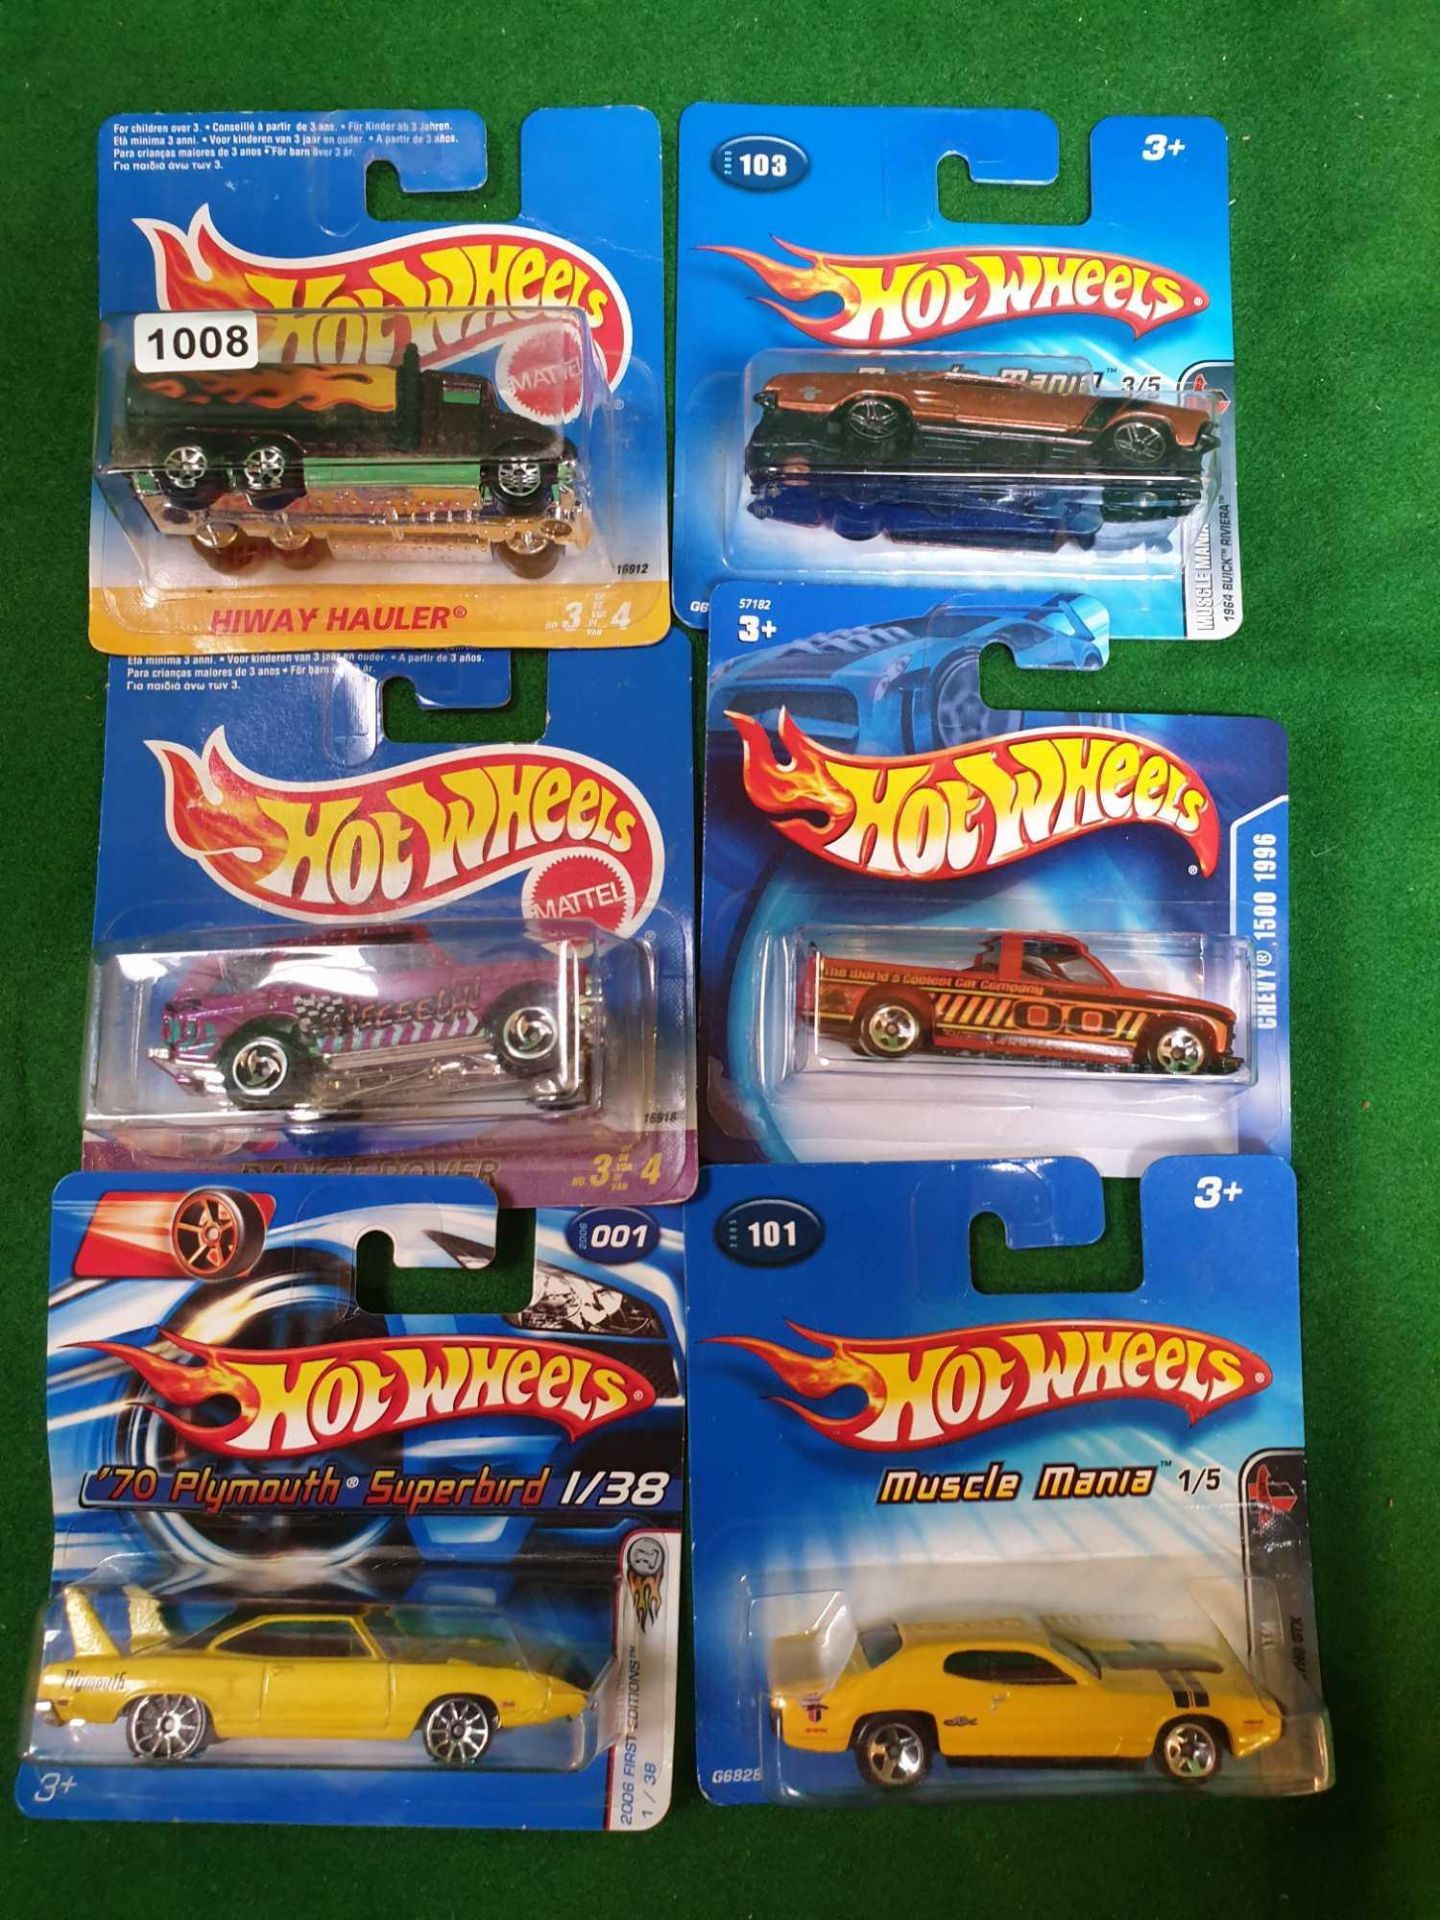 6 X Hot Wheels Carded New Comprising Of Range Rover #16916 Plymouth Superbird 2006 #001 Hiway Hauler - Image 2 of 2